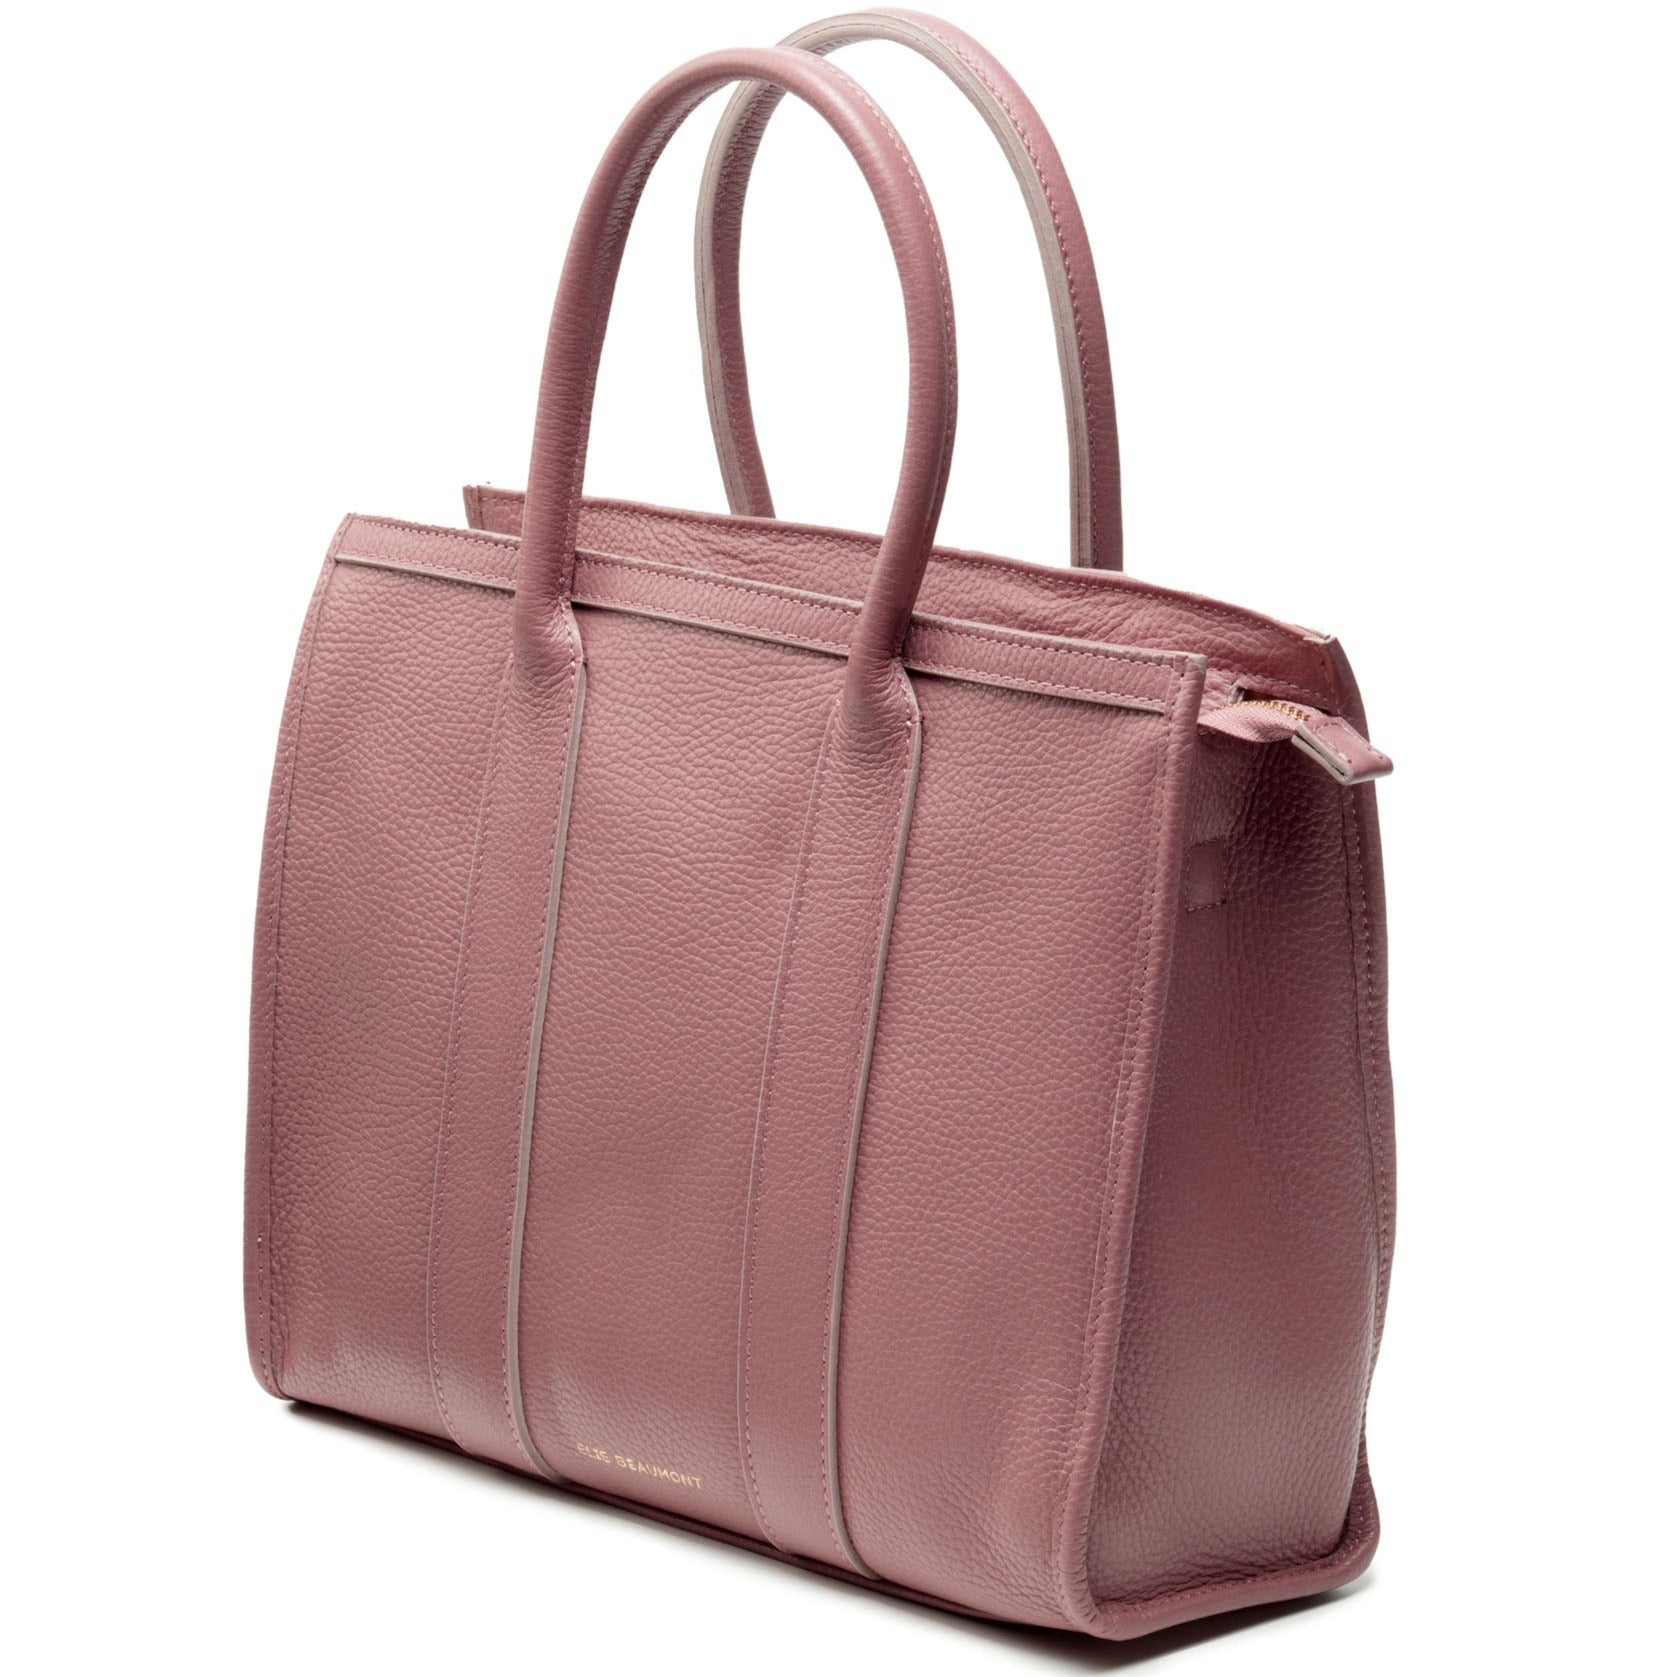 Day Bag - Dusty Rose